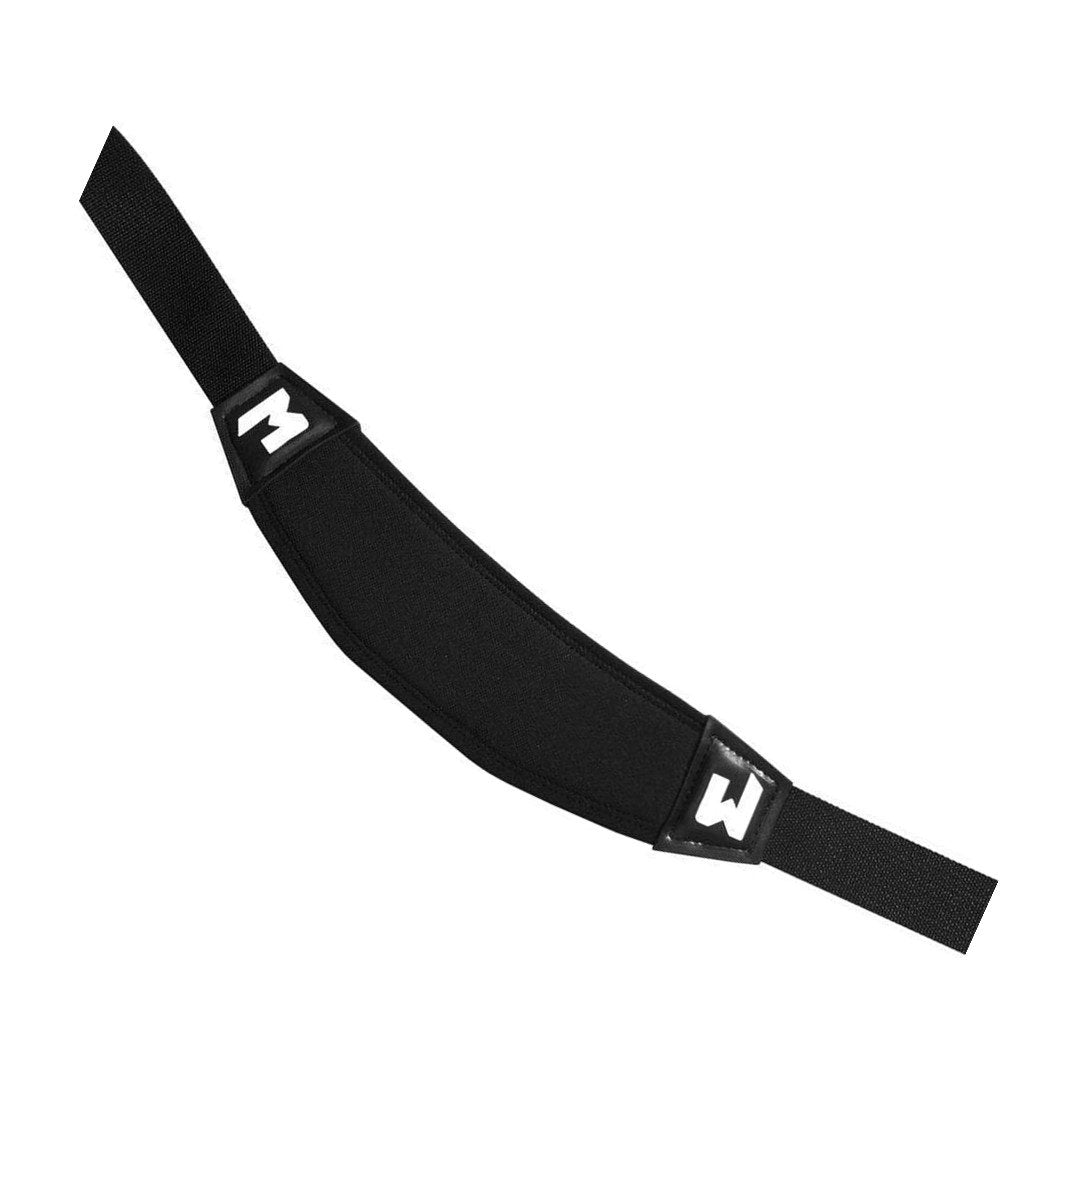 SHOULDER STRAP, LUPA-501, buckles and straps, enduristan, luggage, shoulder straps, straps, Accessories - Imported and distributed in North &amp; South America by Lindeco Genuine Powersports - Premier Powersports Equipment and Accessories for Motorcycle Enthusiasts, Professional Riders and Dealers.